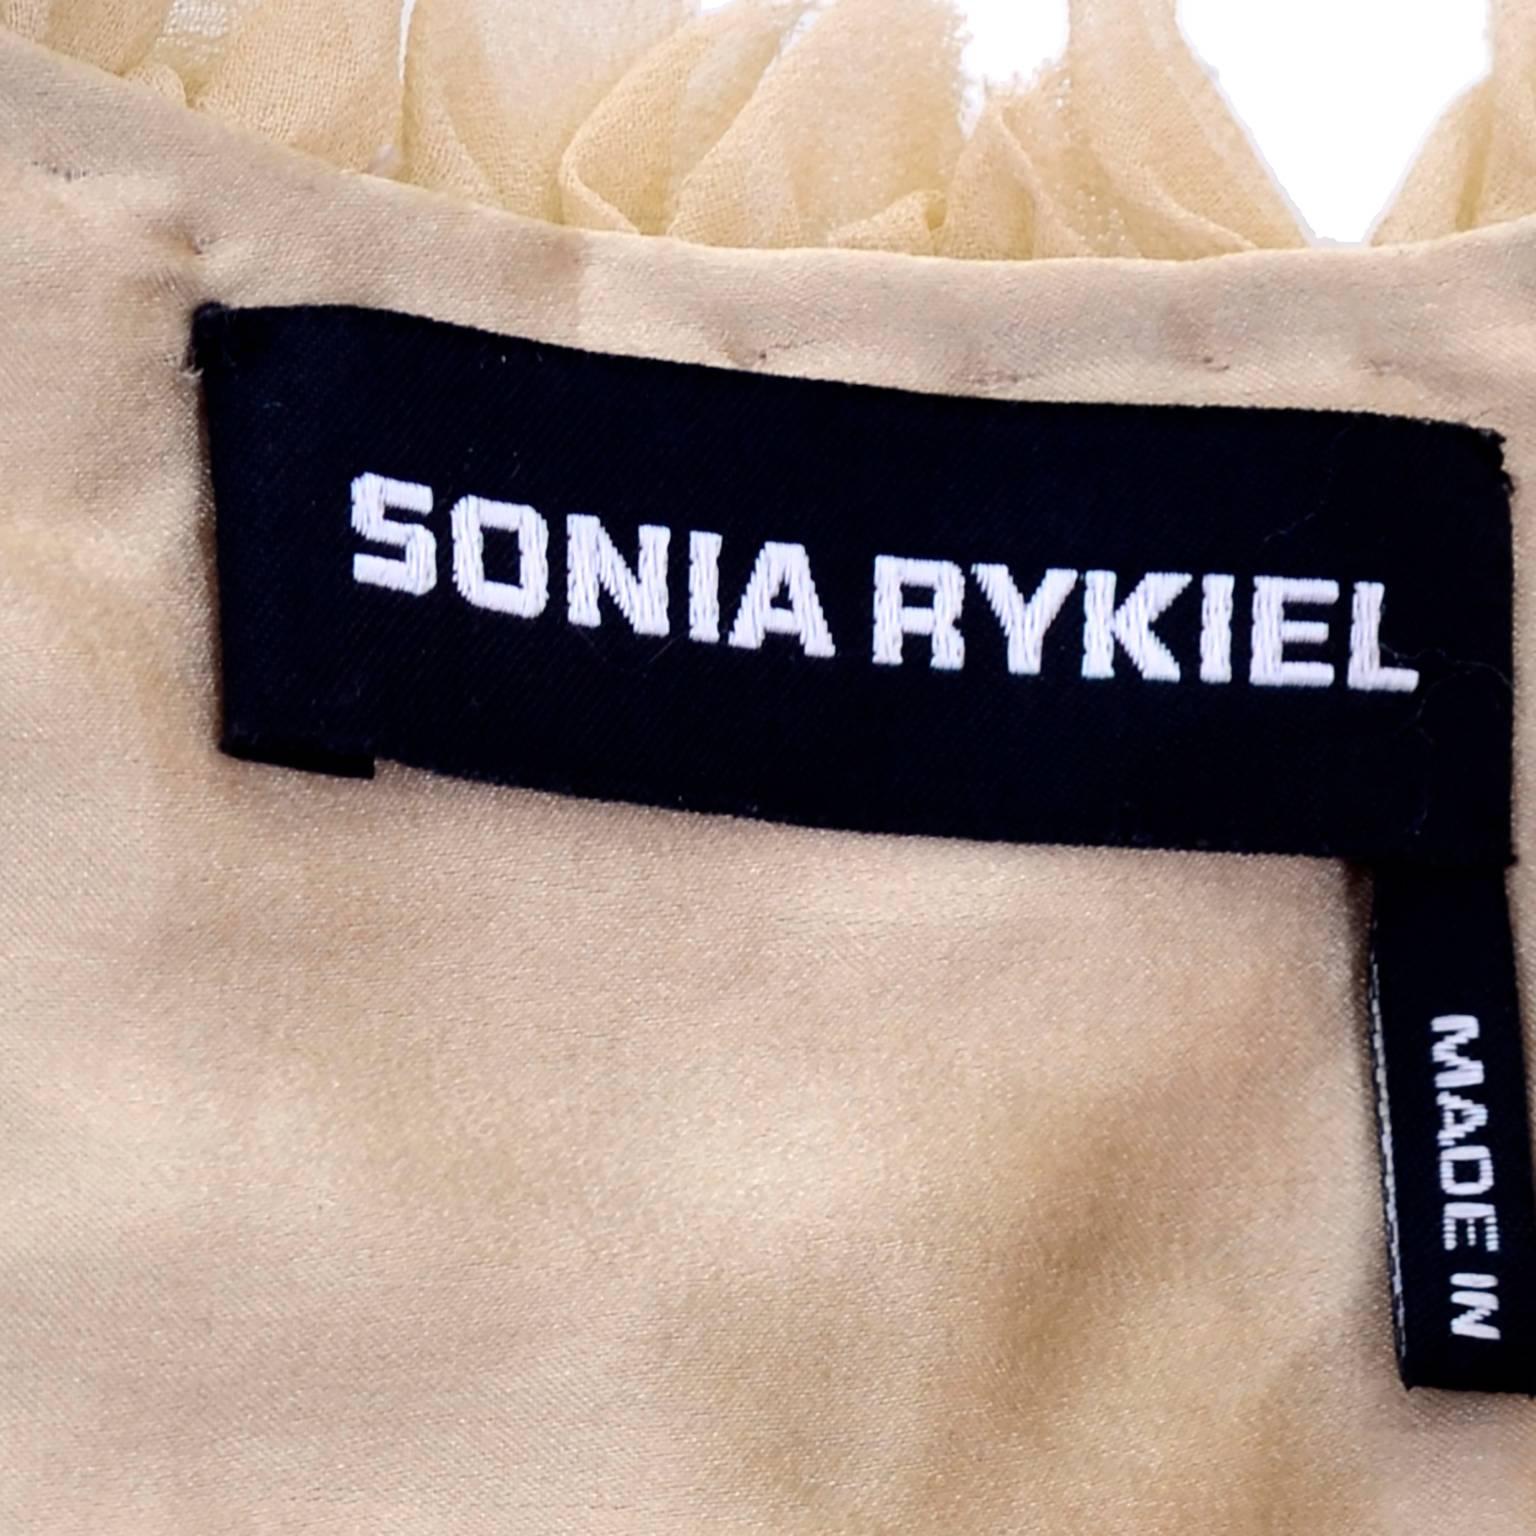 Rare Sonia Rykiel Vintage Jacket in Ruffled Silk Cropped Top Size Small 3